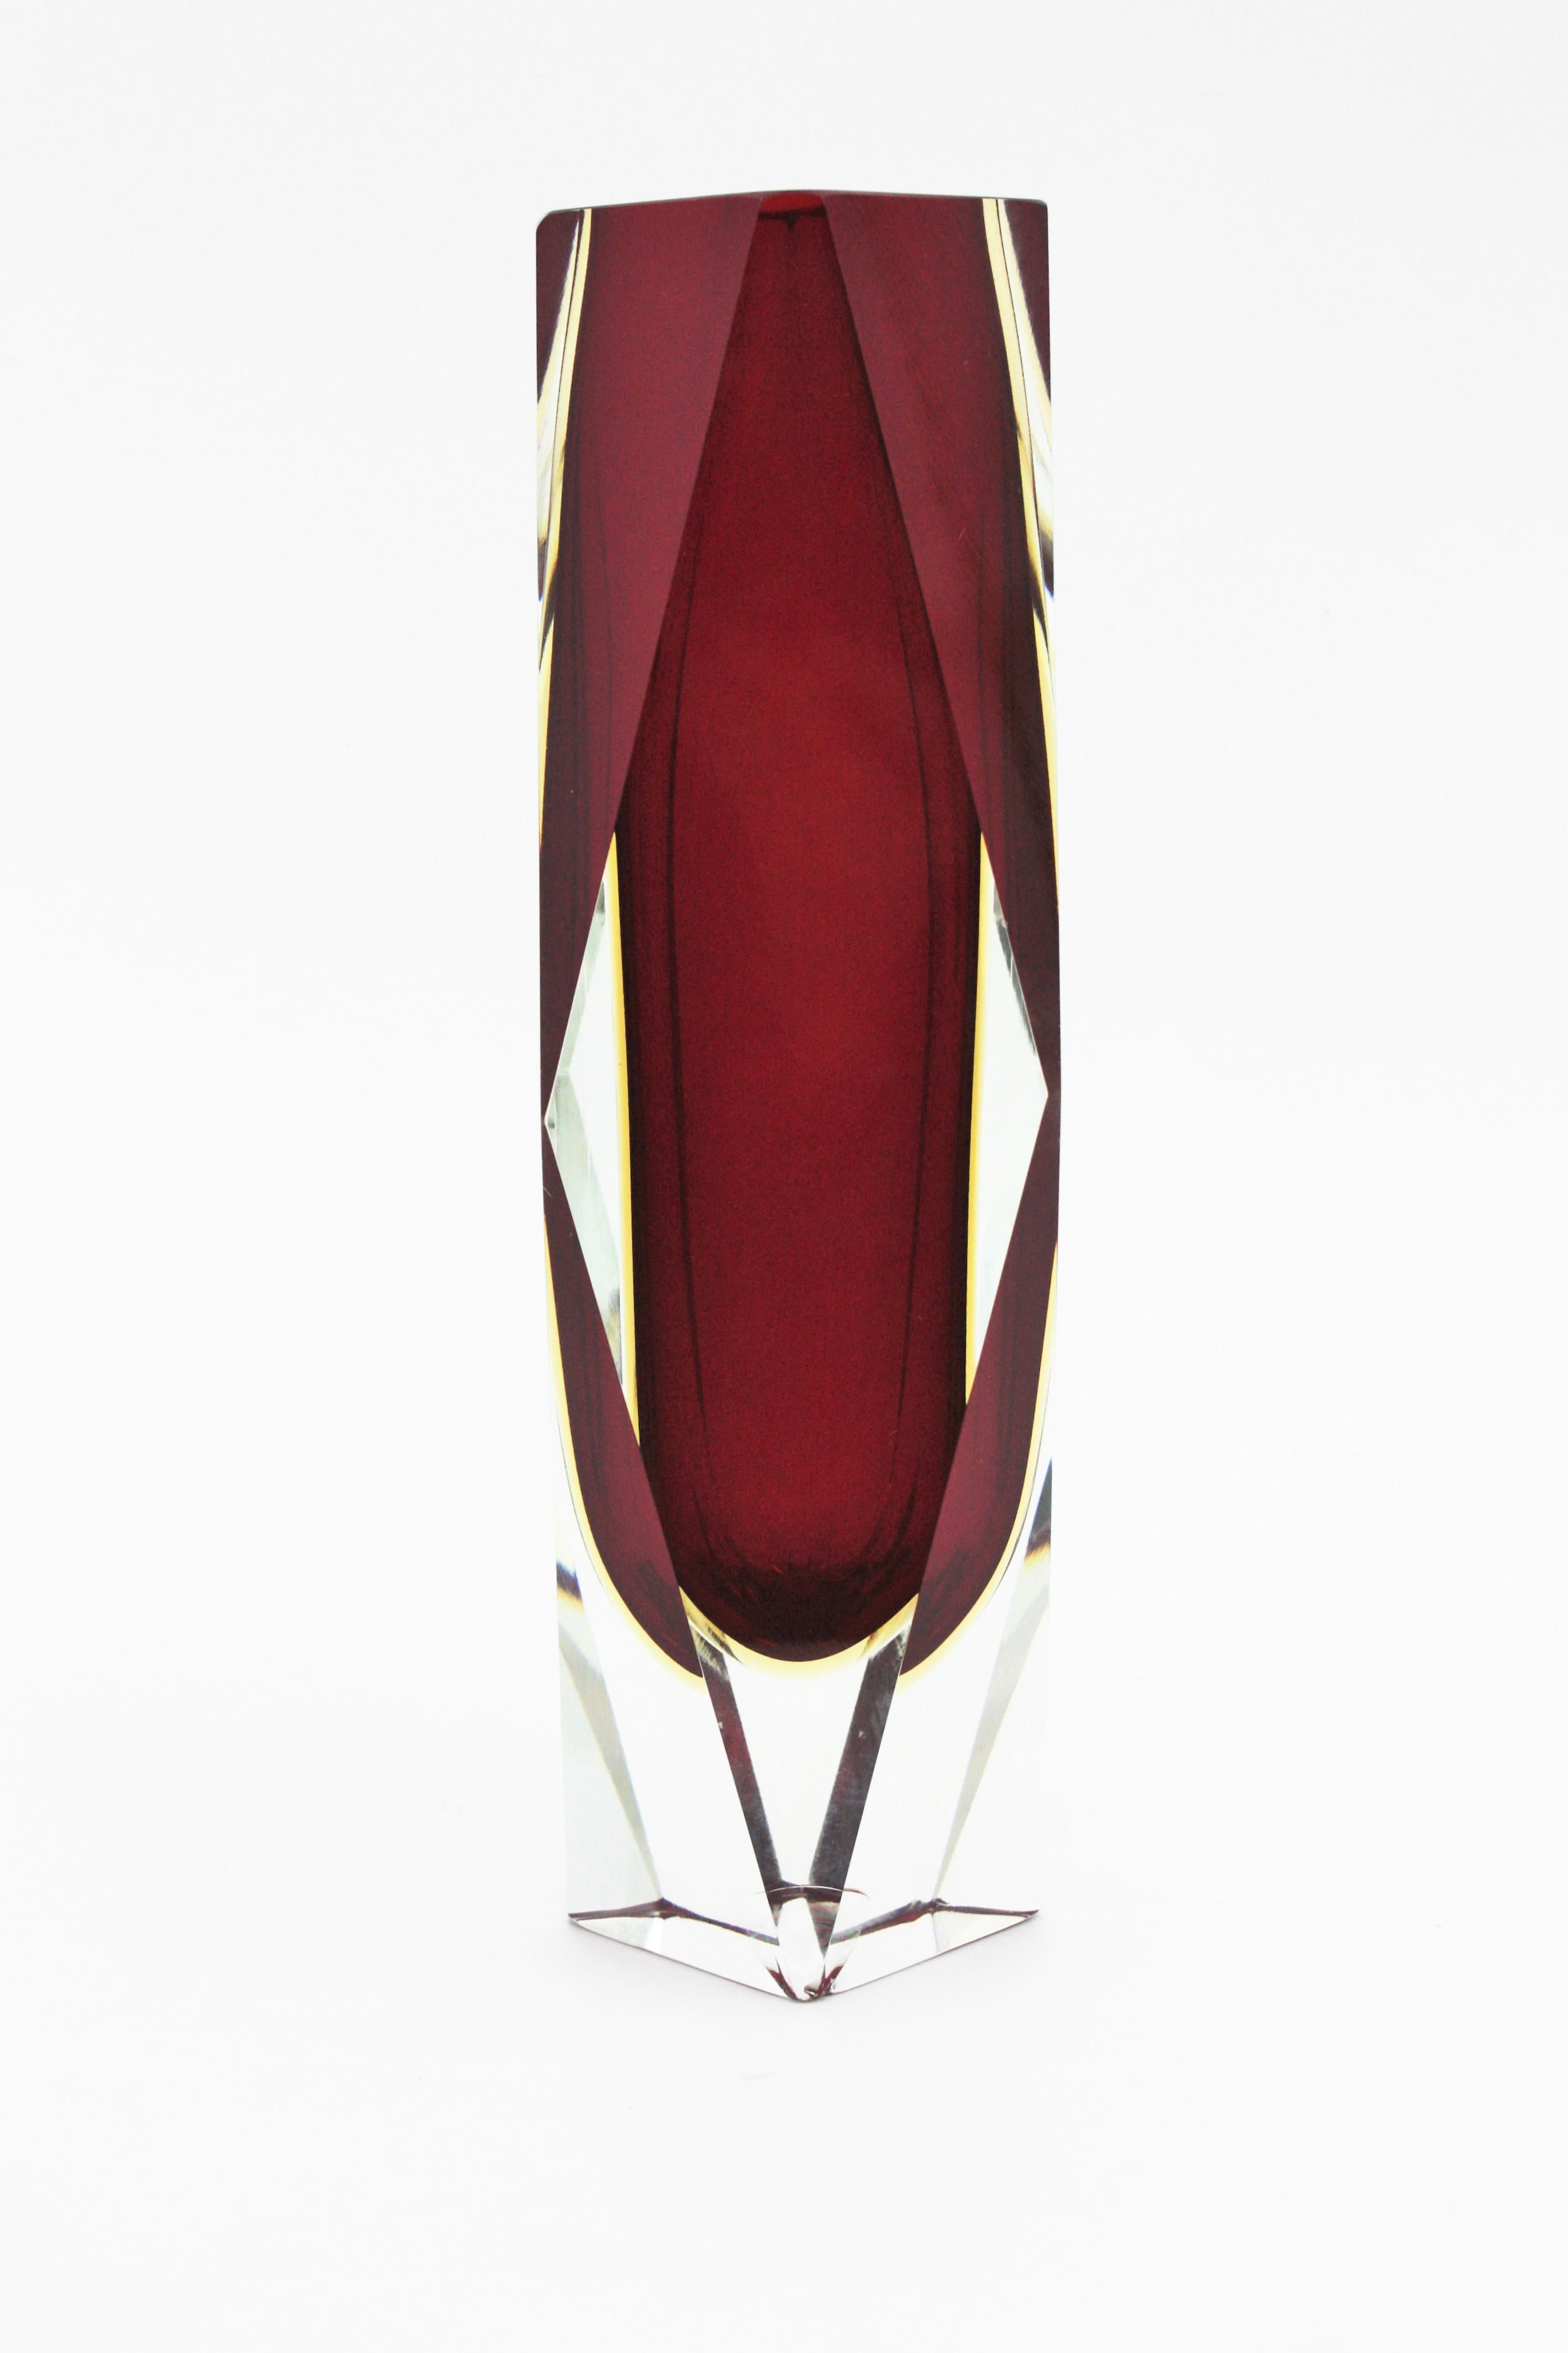 Massive Mandruzzato Murano Faceted Sommerso Red and Yellow Art Glass Vase For Sale 3